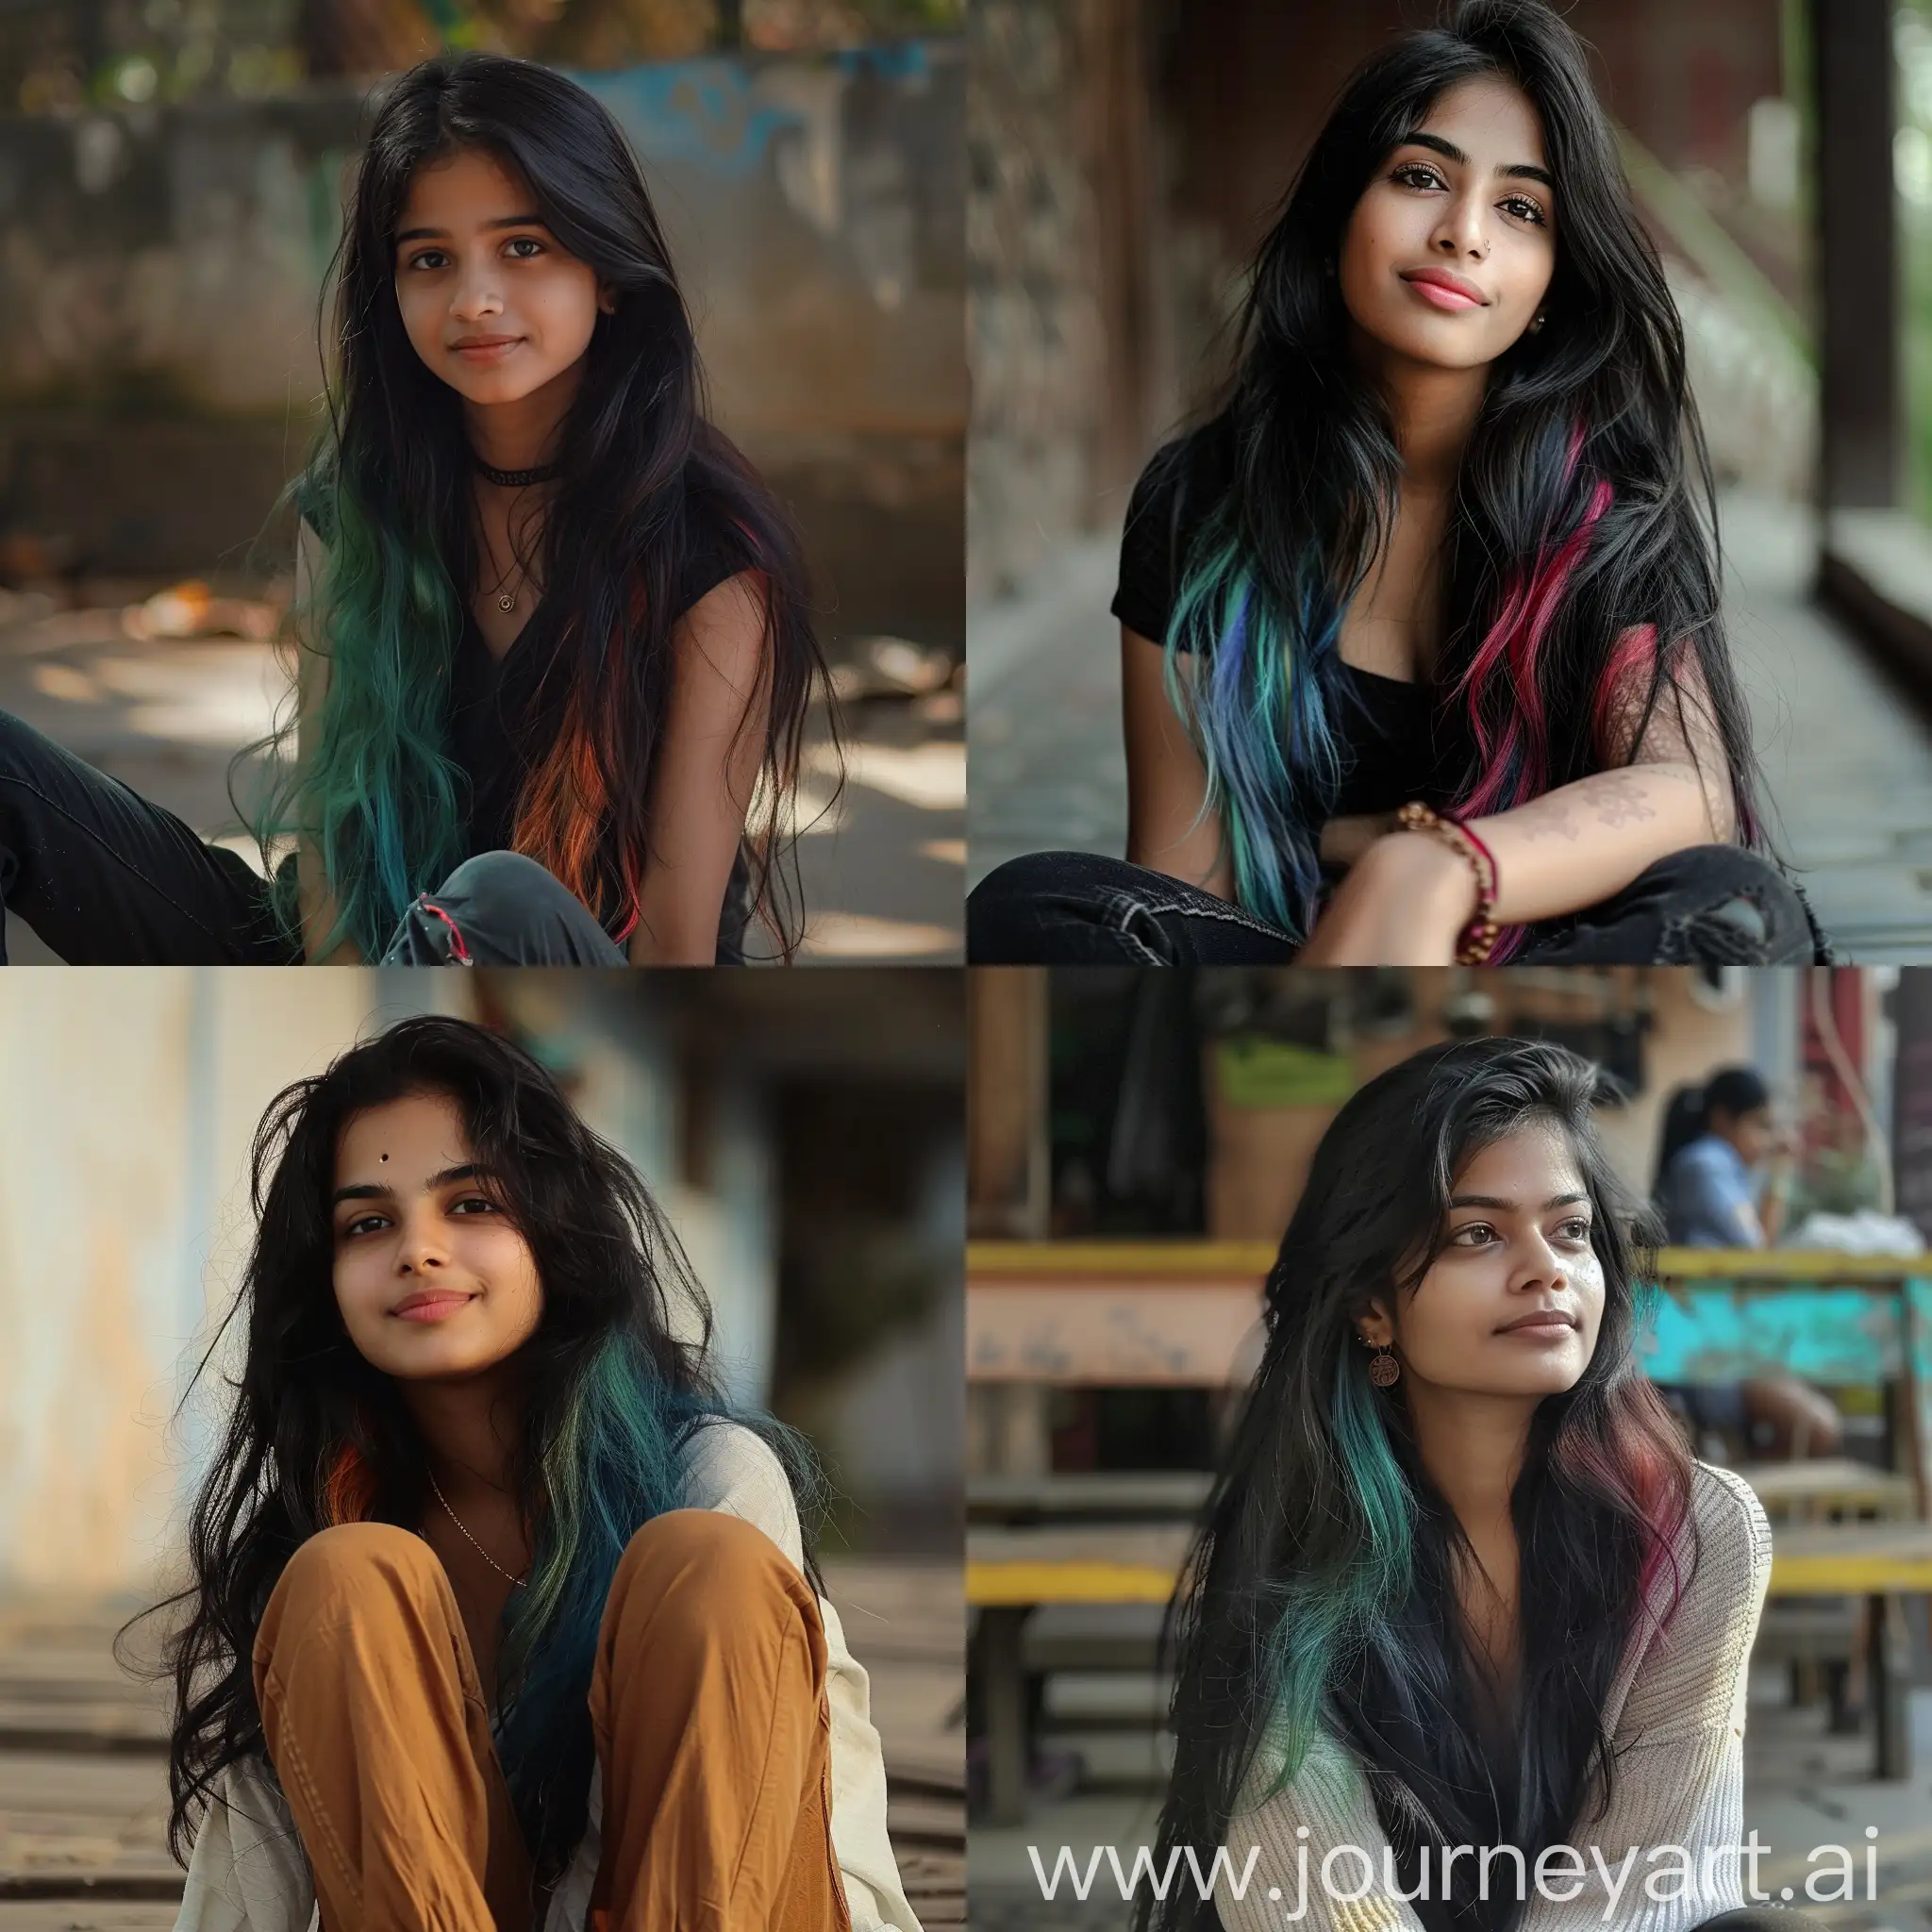 BEAUTIFUL AND ATTRACTIVE MUMBAI TEENAGER GIRL 19 YEARS OLD , cute, smart, Instagram model, looking gorgeous, long black hair, little bit colourful hair, warm, sitting in marine lines marathi girl